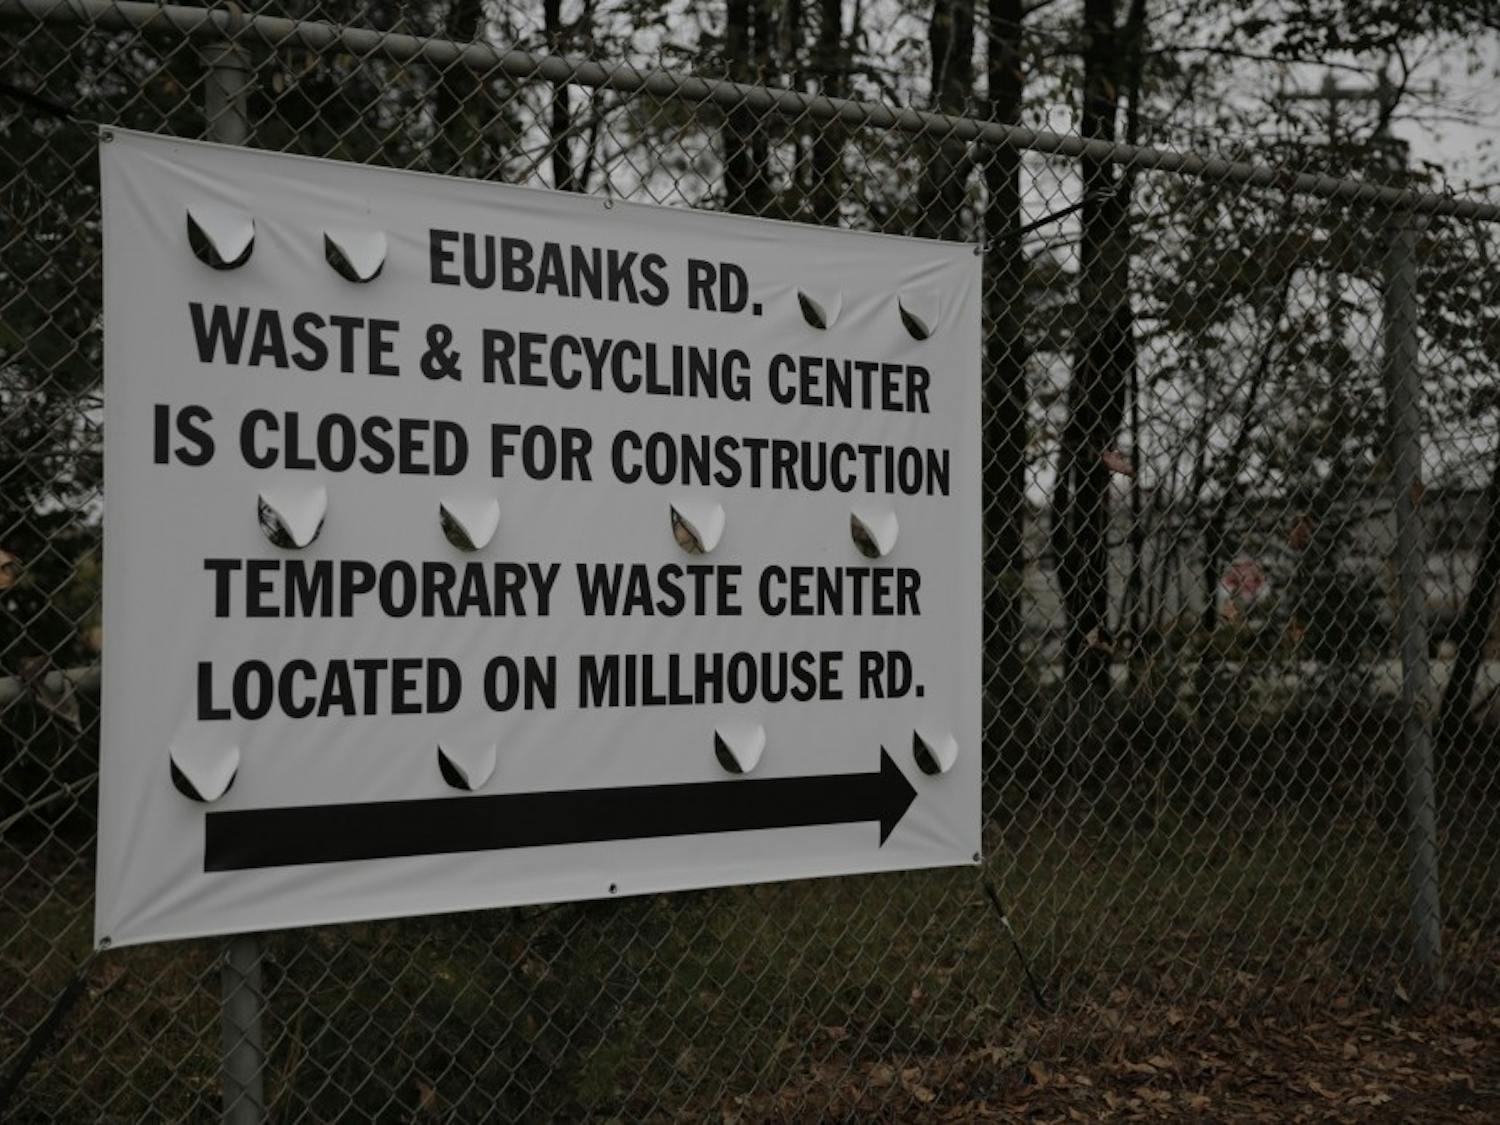 Construction&nbsp;activities&nbsp;to remodel, expand and&nbsp;make improvements at the Eubanks Rd. Waste and Recycling Center are estimated to last ten months.